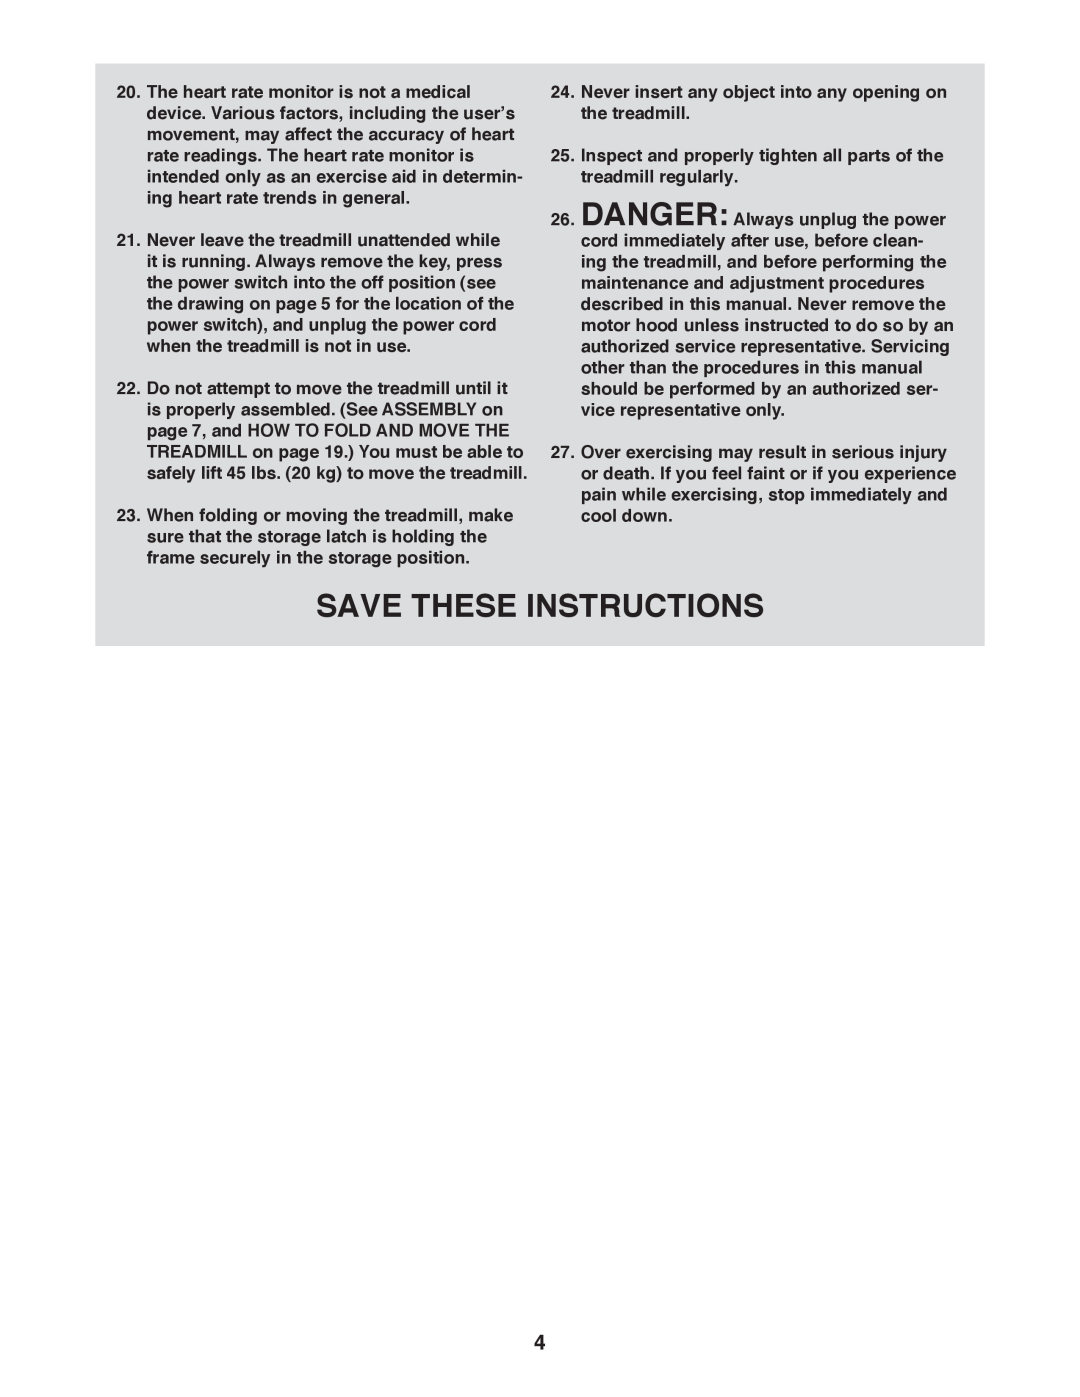 Weslo WLTL39312.0 user manual Save These Instructions, Never insert any object into any opening on the treadmill 